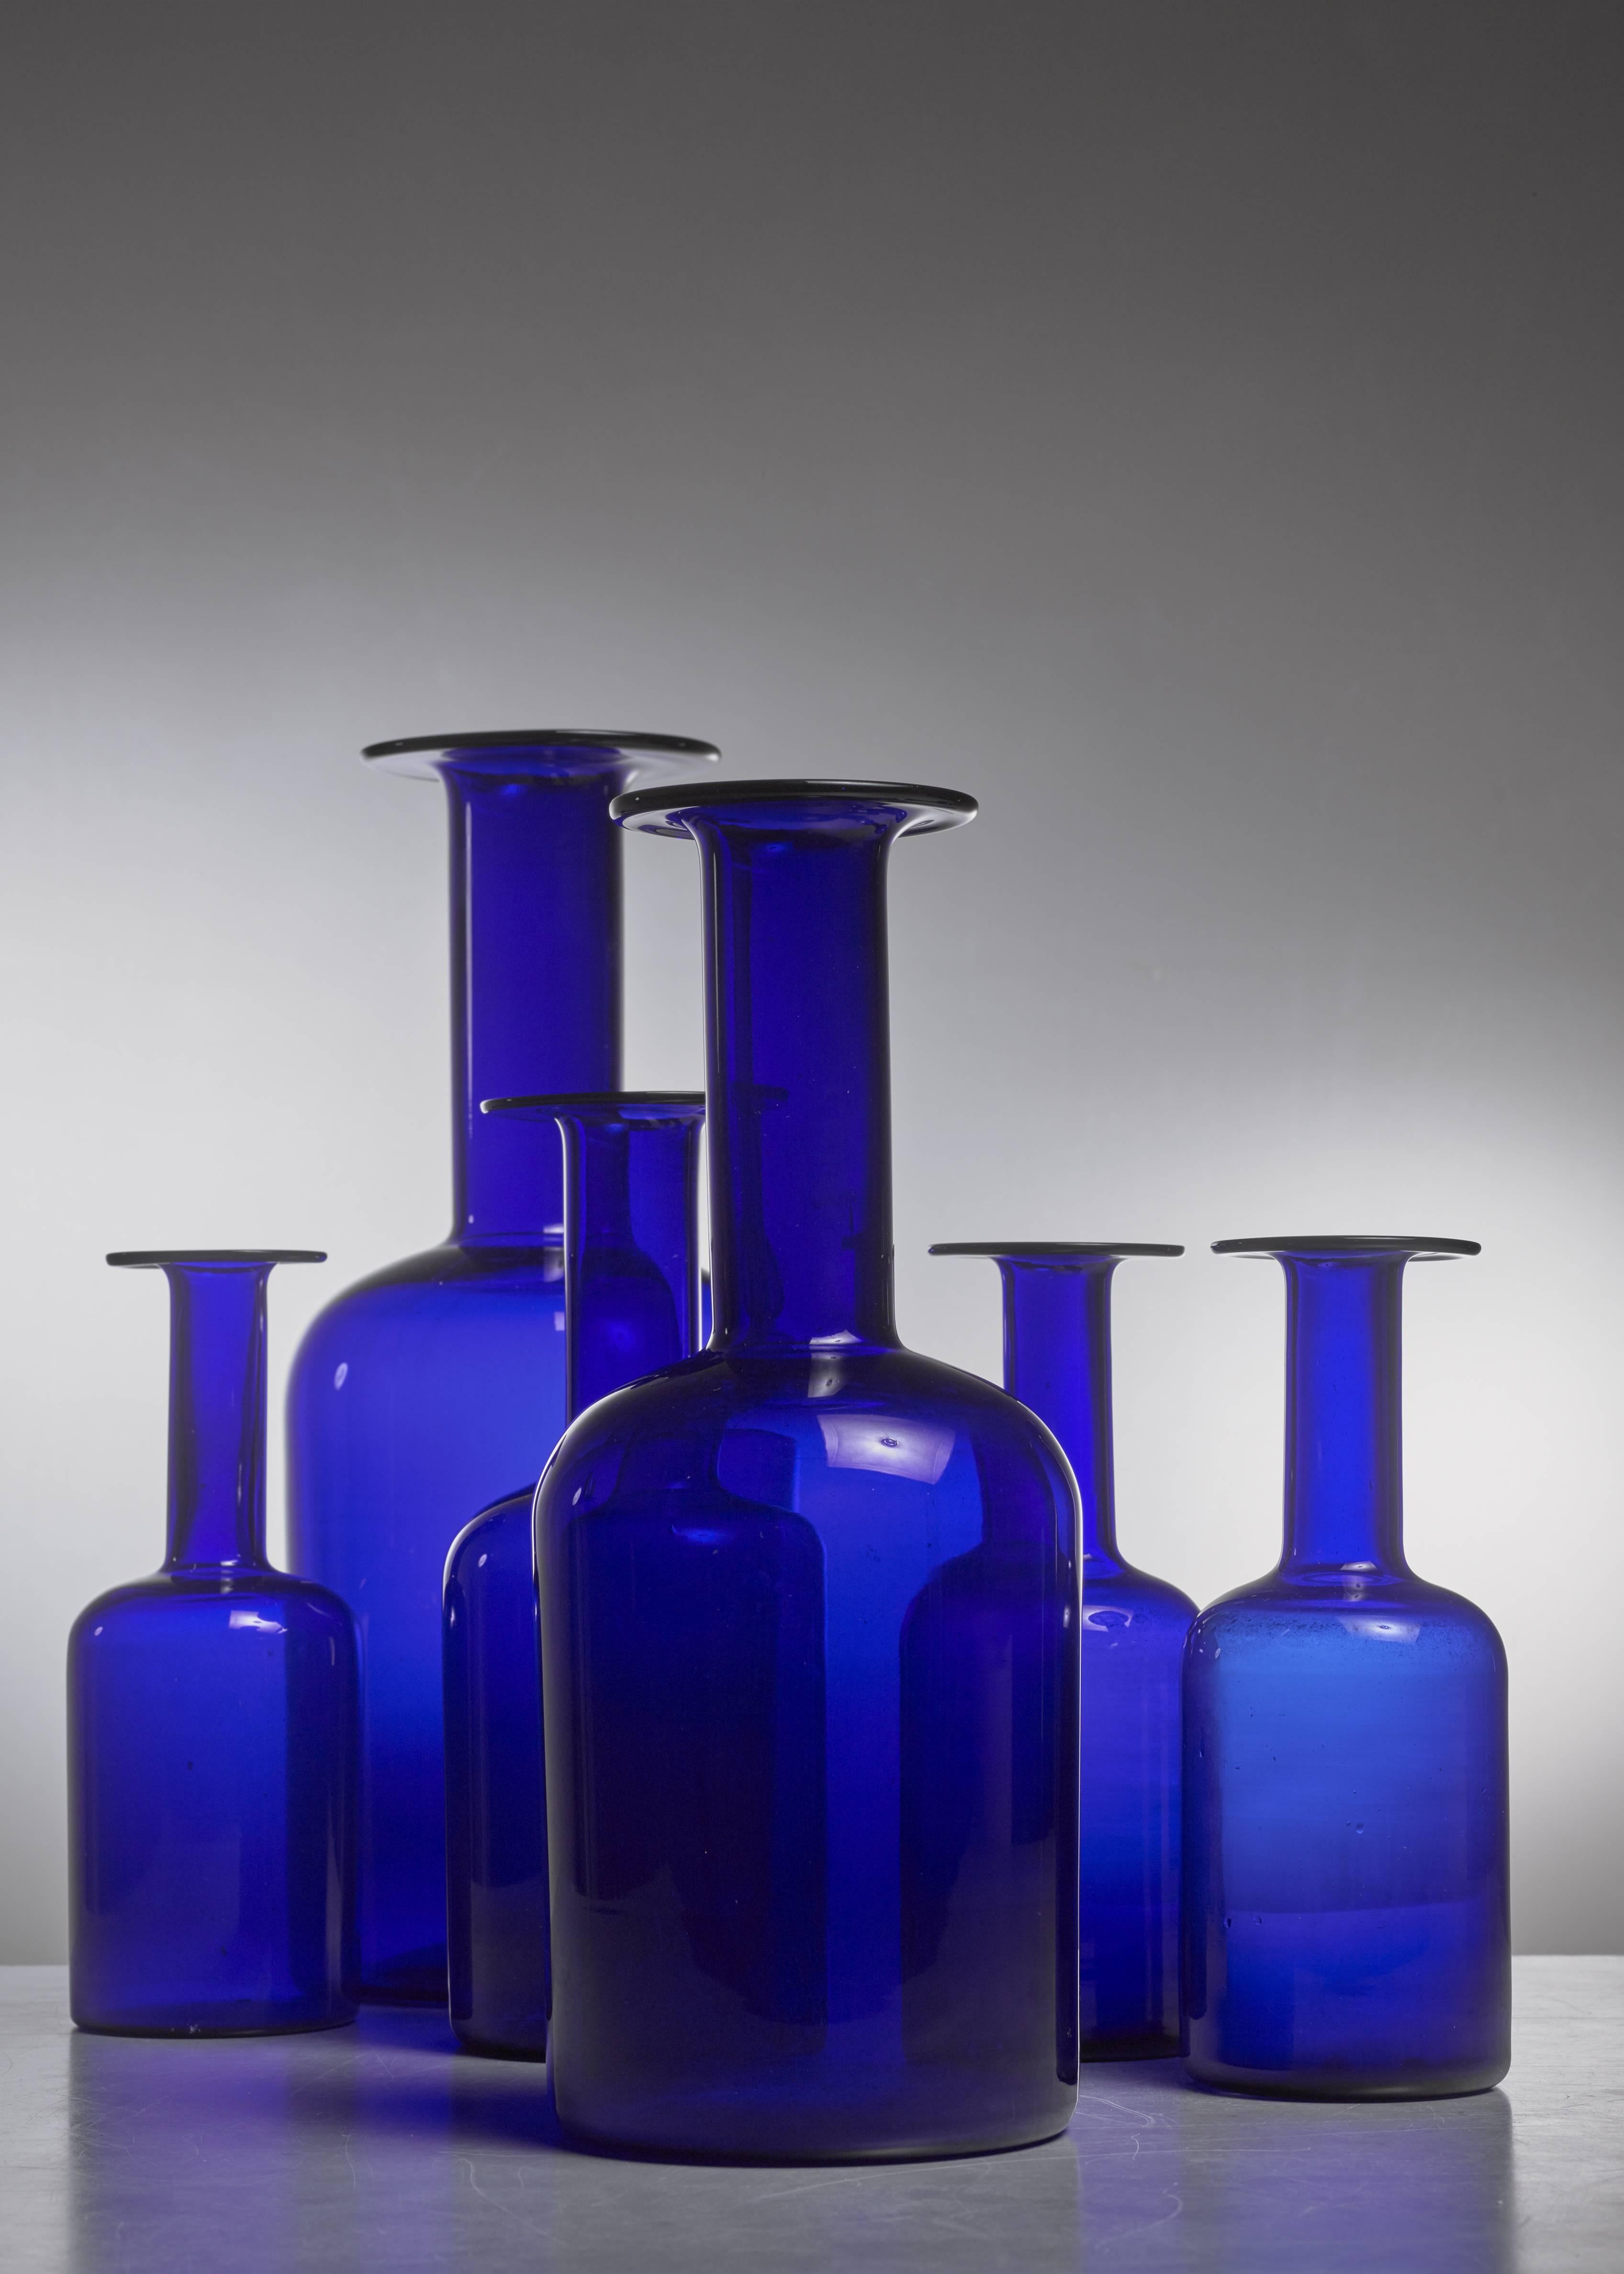 A set of six blue glass Gulvases in varying sizes, designed by Otto Brauer for Danish company Holmegaard. Measure: The smallest vase is 25 cm high with a 9.5 cm diameter. The tallest one is 43.5 cm high with a 17.5 cm diameter.

The middle size vase